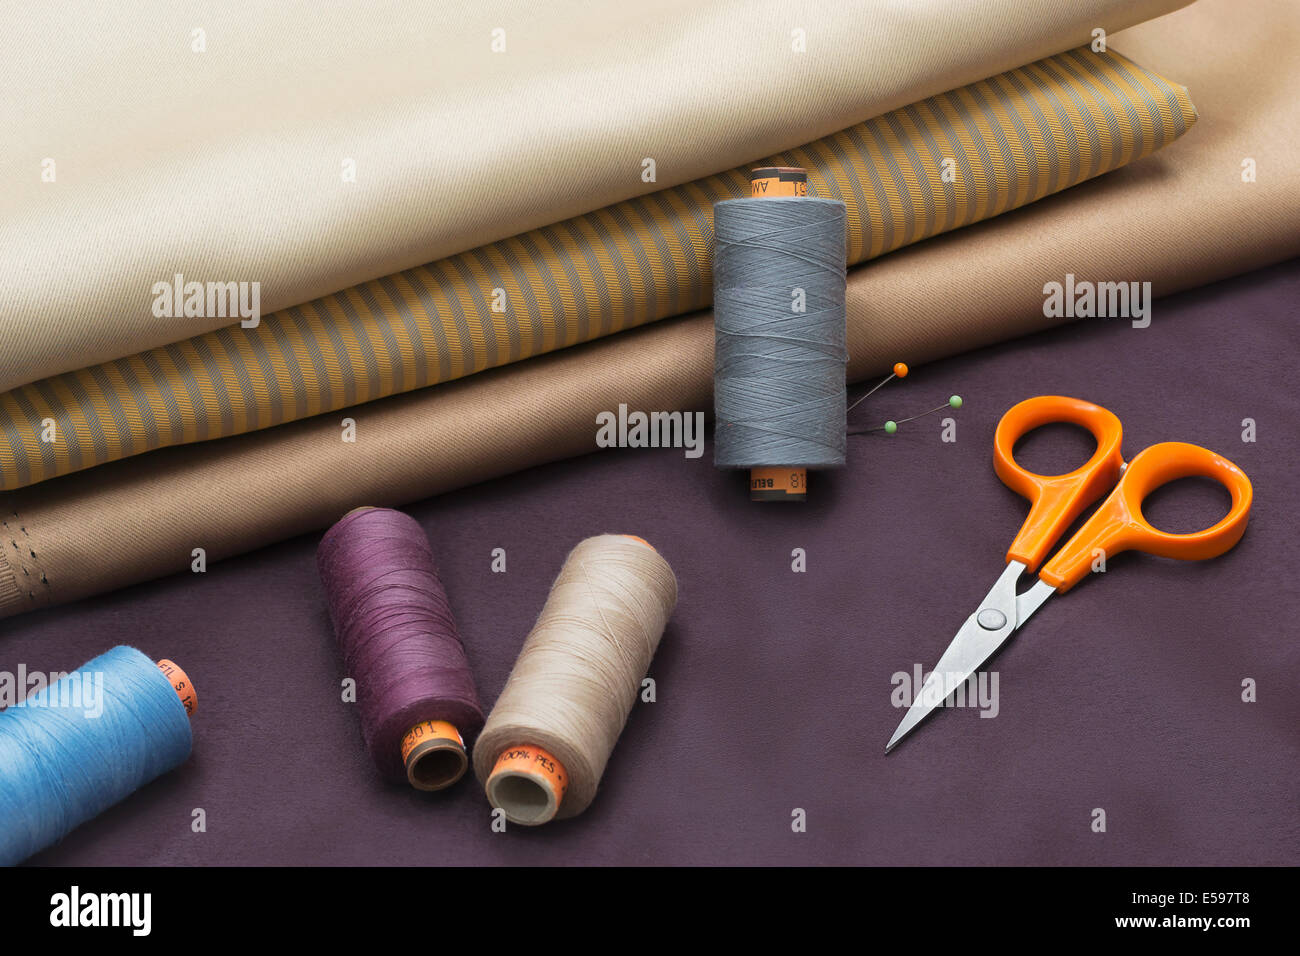 Different kind of fabric and tailors tools - thread spools, pin, scissors. Stock Photo